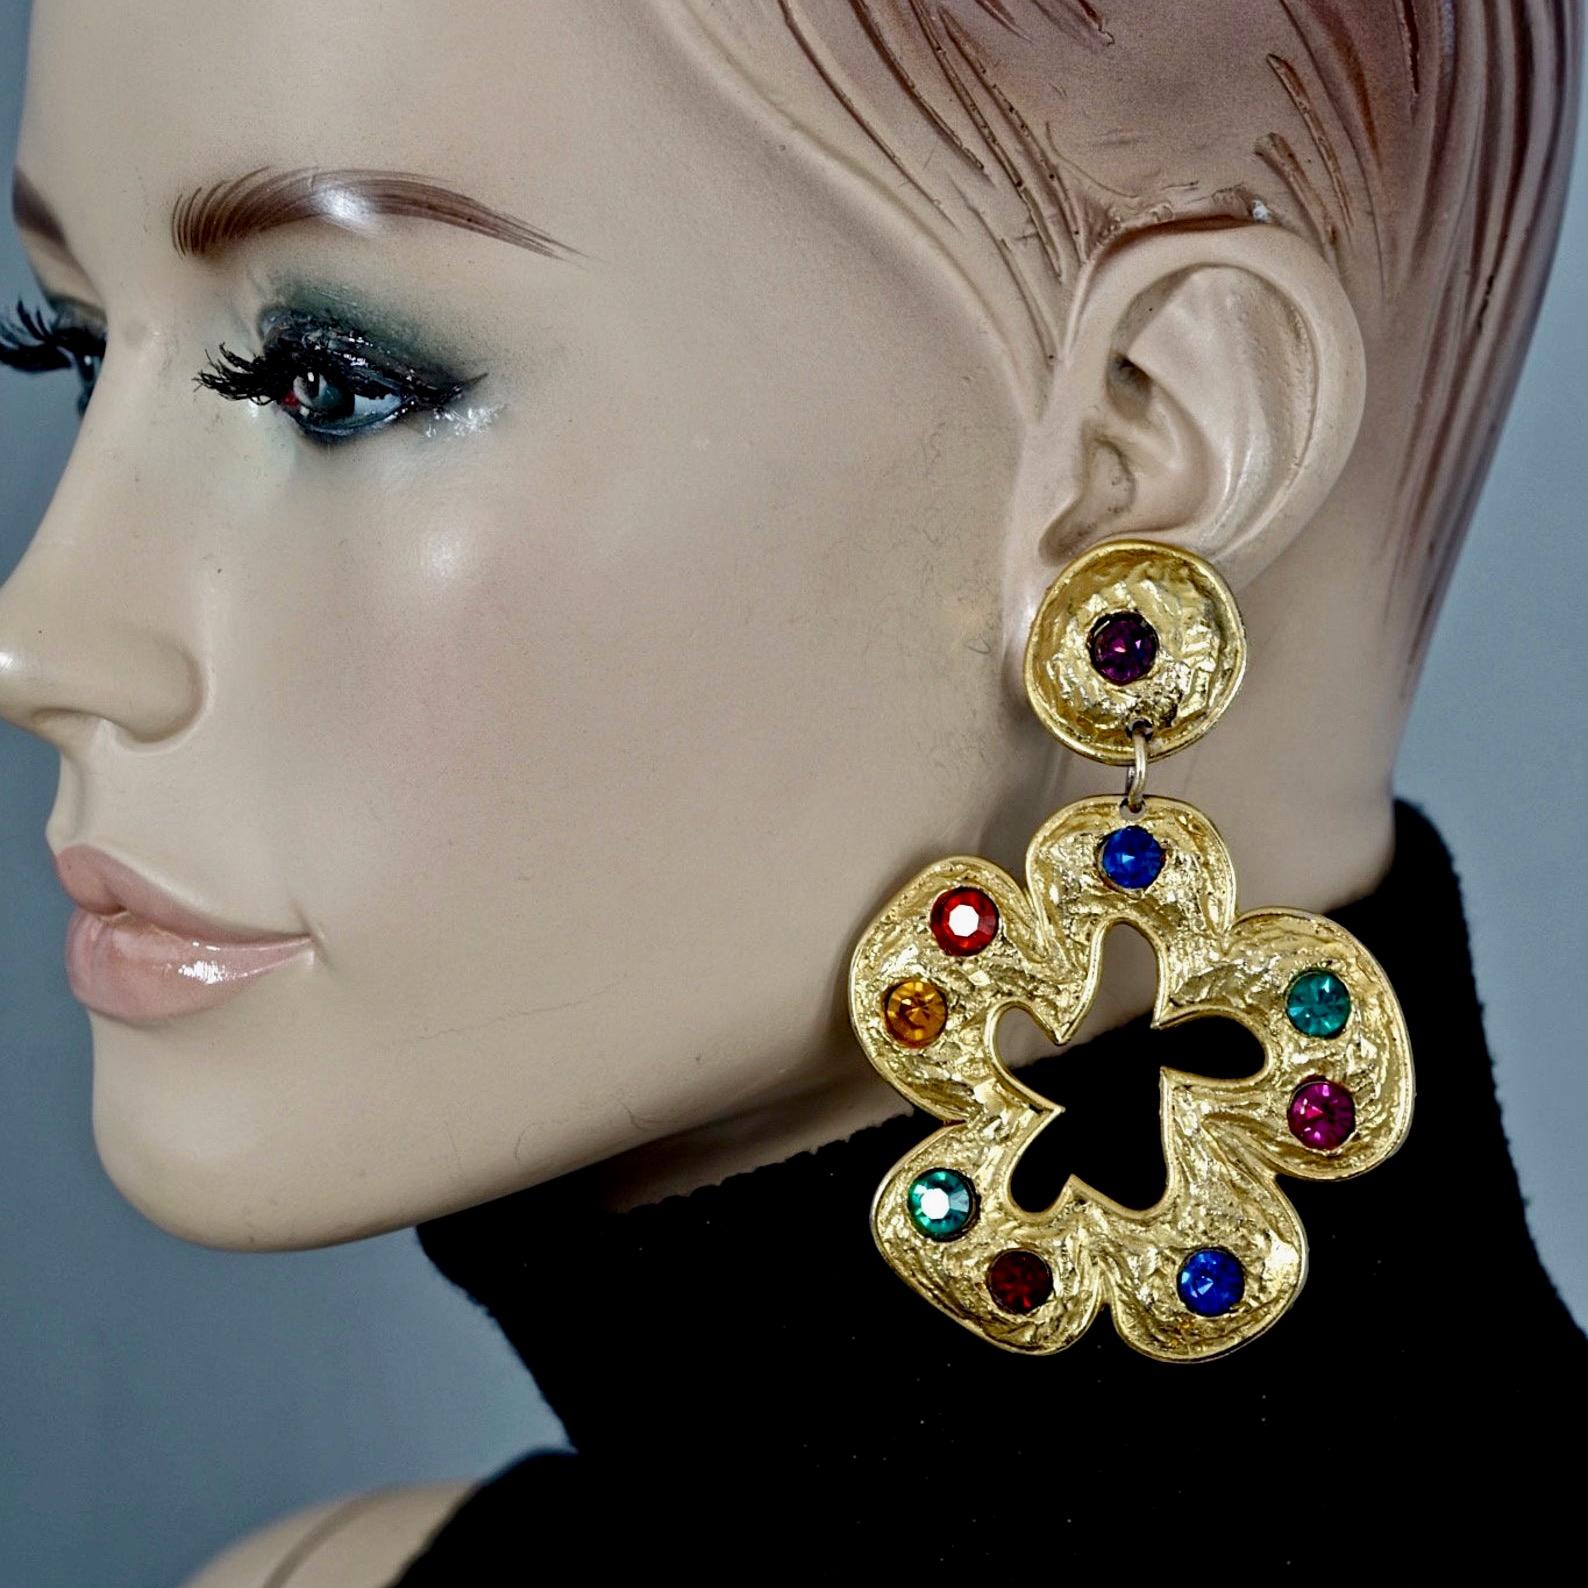 Vintage Massive EDOUARD RAMBAUD Jewelled Flower Dangling Earrings

Measurements:
Height: 3.42 inches (8.7 cm)
Width: 2.40 inches (6.1 cm)
Weight per Earring: 39 grams

Features:
- 100% Authentic EDOUARD RAMBAUD.
- Massive hammered flower dangling